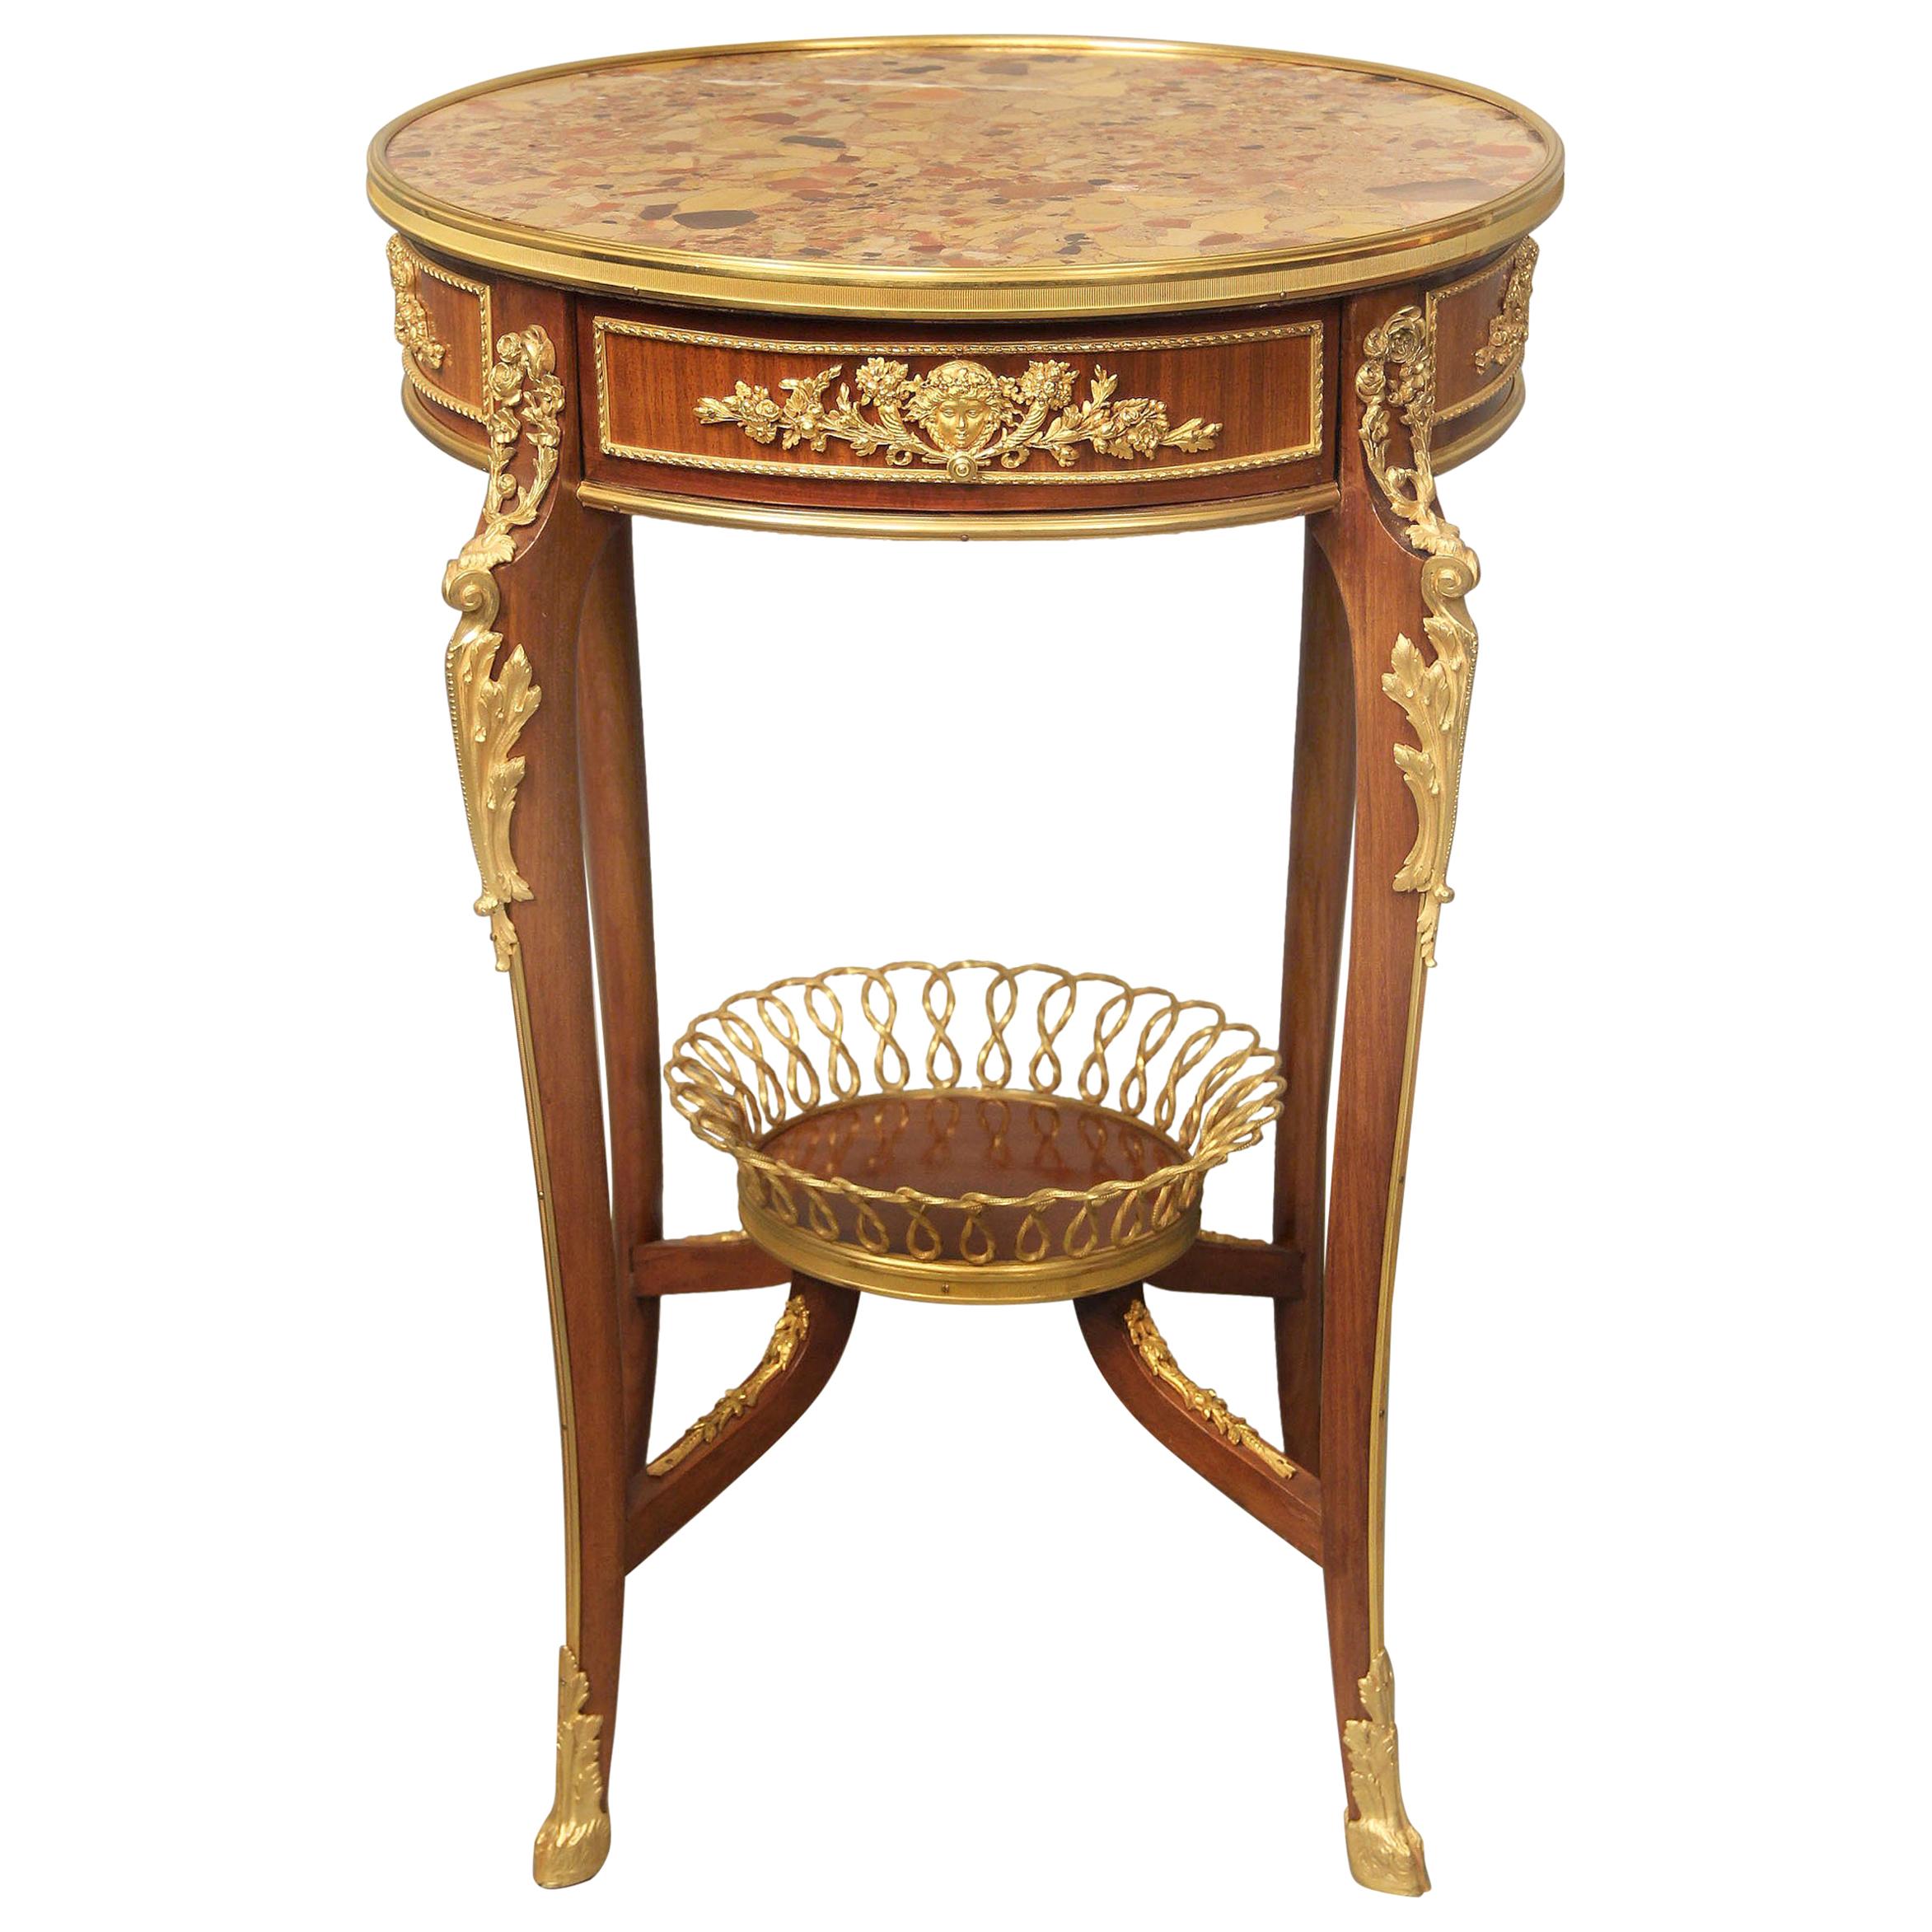 Late 19th Century Louis XV Style Gilt Bronze-Mounted Lamp Table